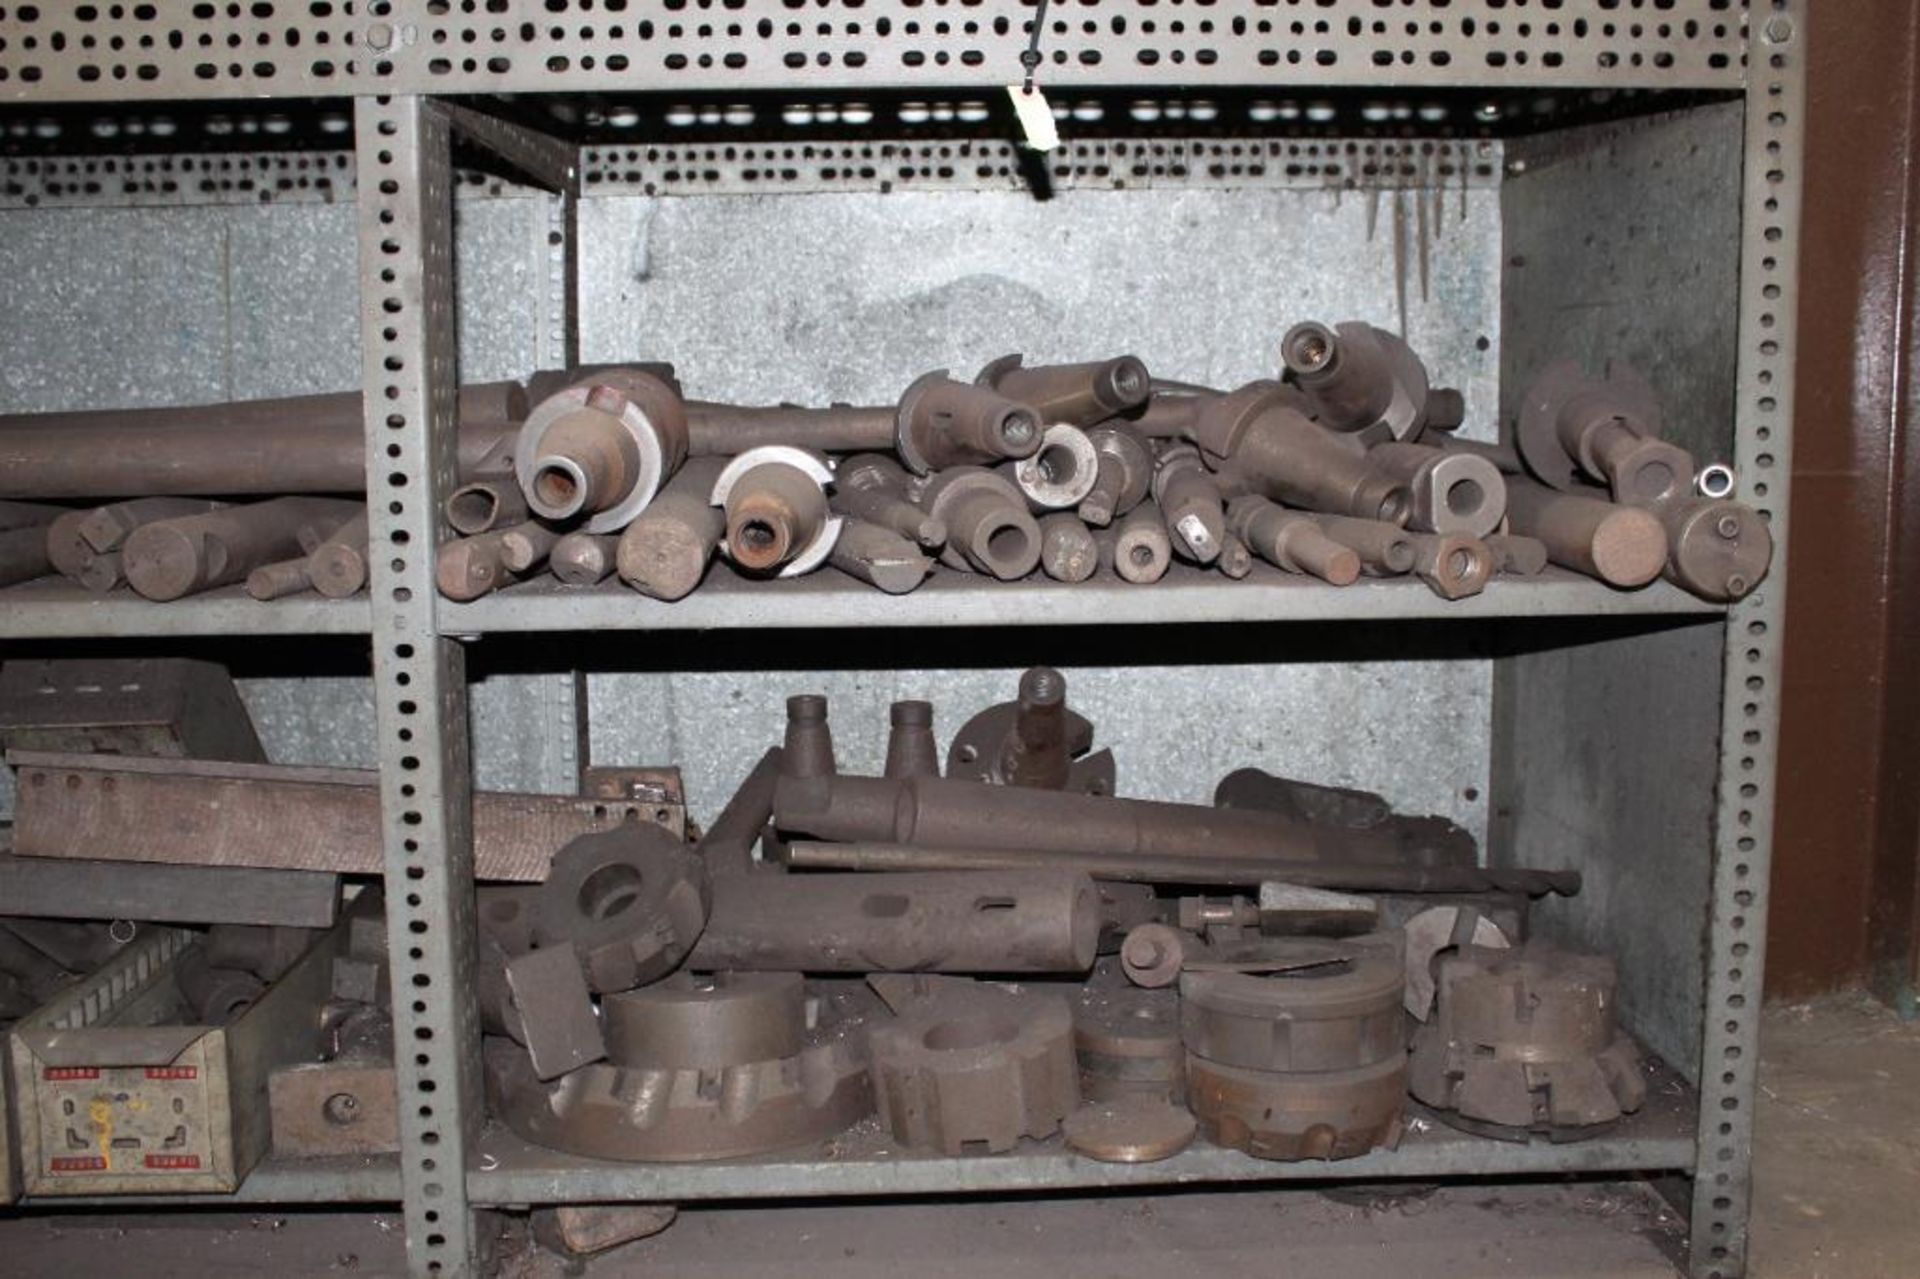 Lot of Assorted Machine Tools & Holders (Contents of Shelves Only) - Image 3 of 3